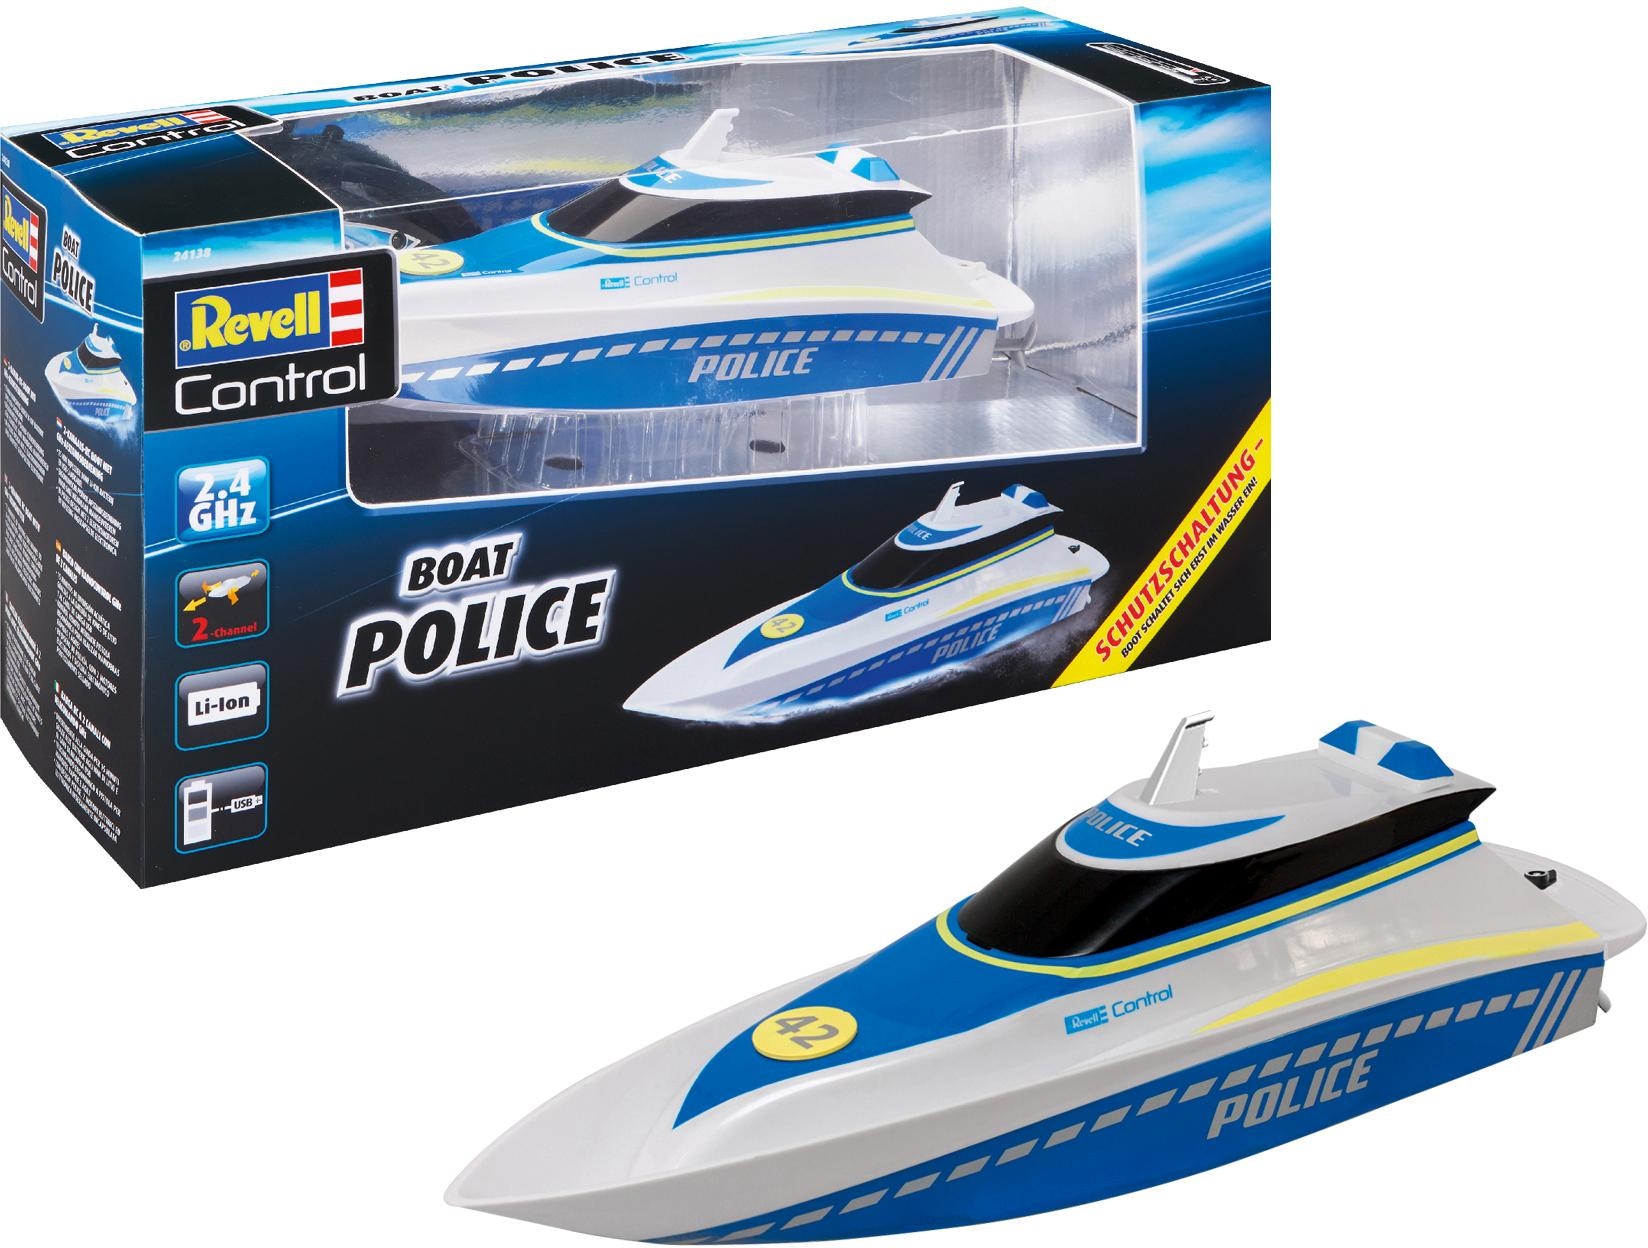 Revell® RC-Boot »Revell® control, Police, 2,4 GHz«